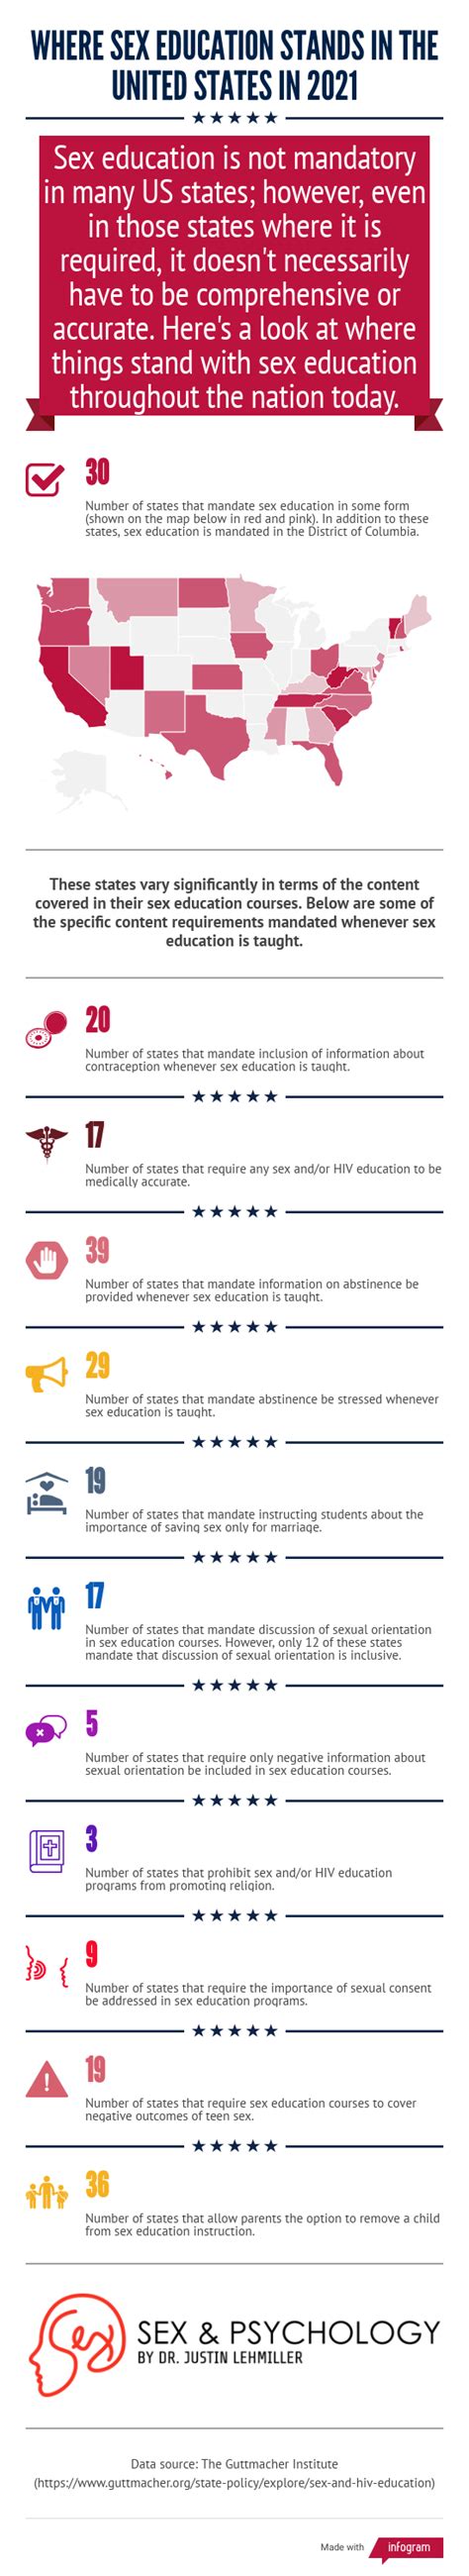 The State Of Sex Education In The United States In 2021 Infographic — Sex And Psychology